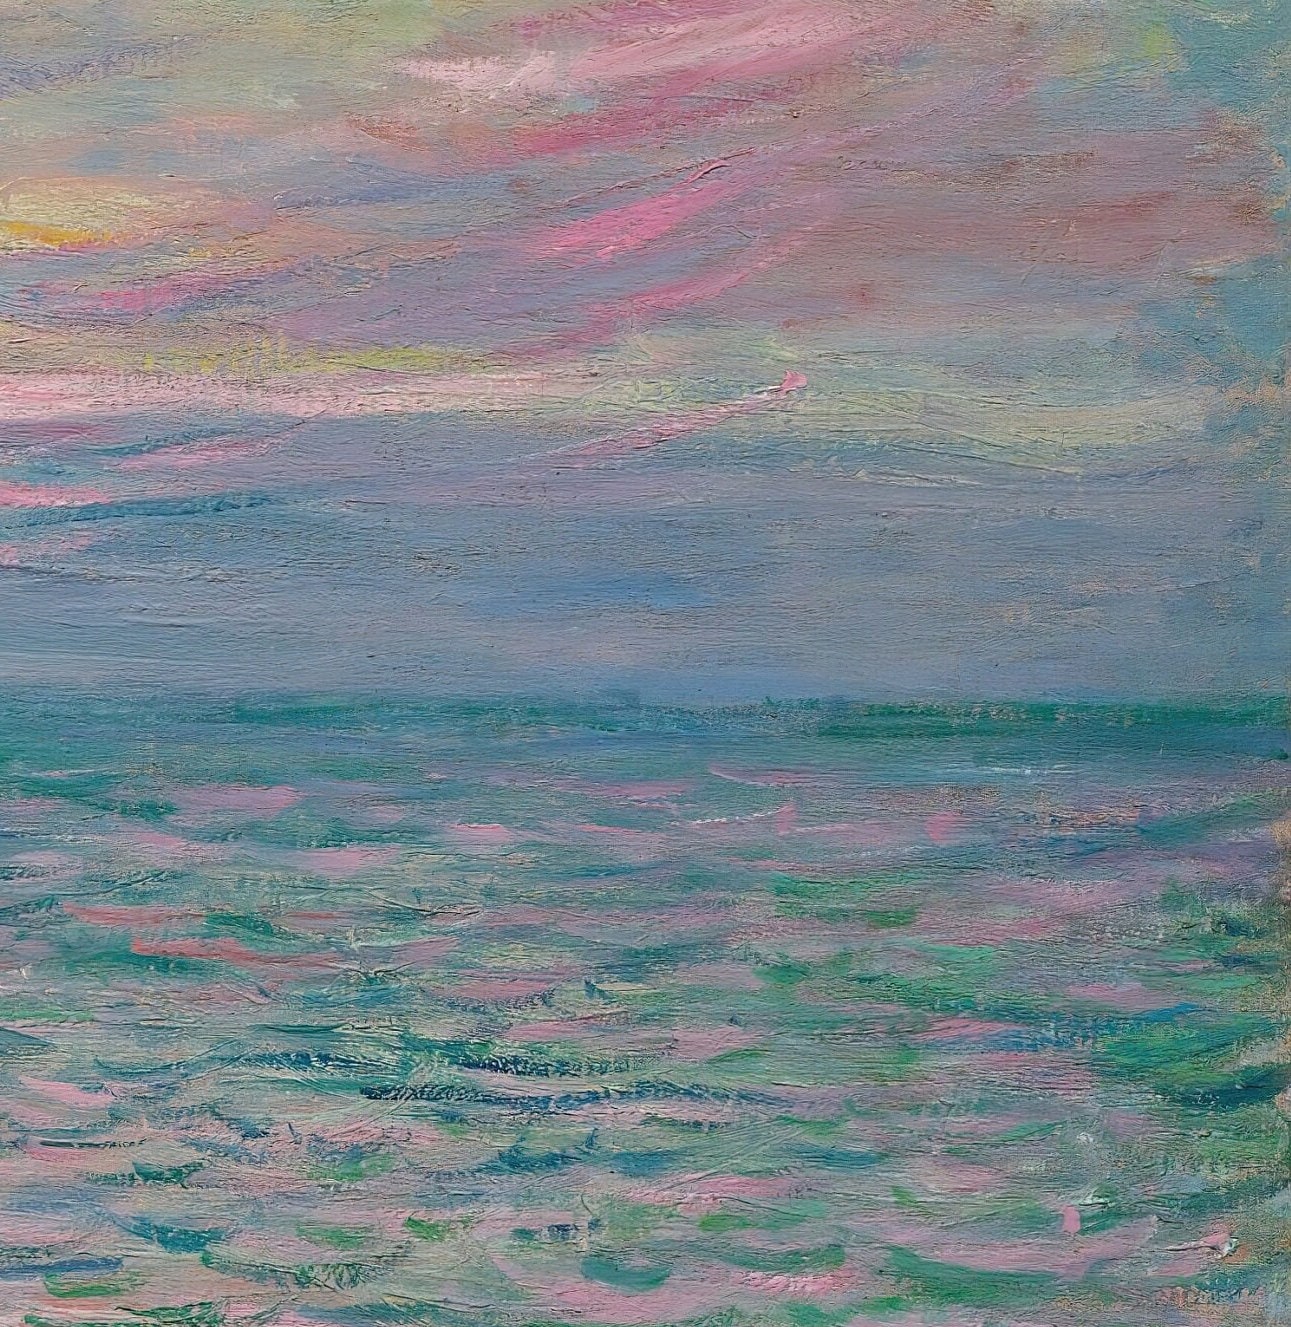 Coucher De Soleil À Pourville,Pleine Mer by Cloude Monet,3d Printed with texture and brush strokes looks like original oil-painting,code:647